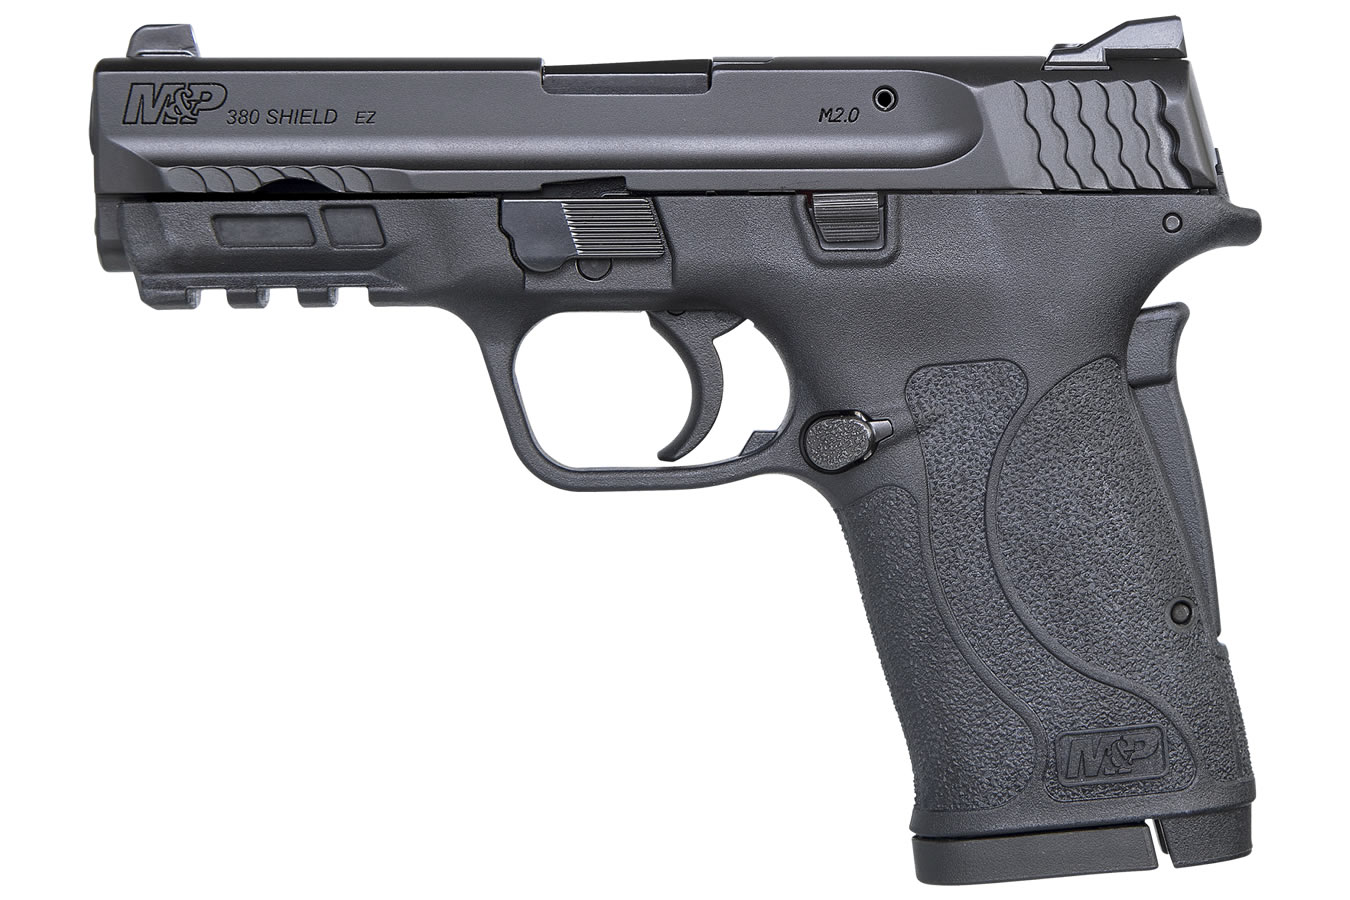 No. 9 Best Selling: SMITH AND WESSON MP380 SHIELD 380 ACP PISTOL W/ NO THUMB SAFETY